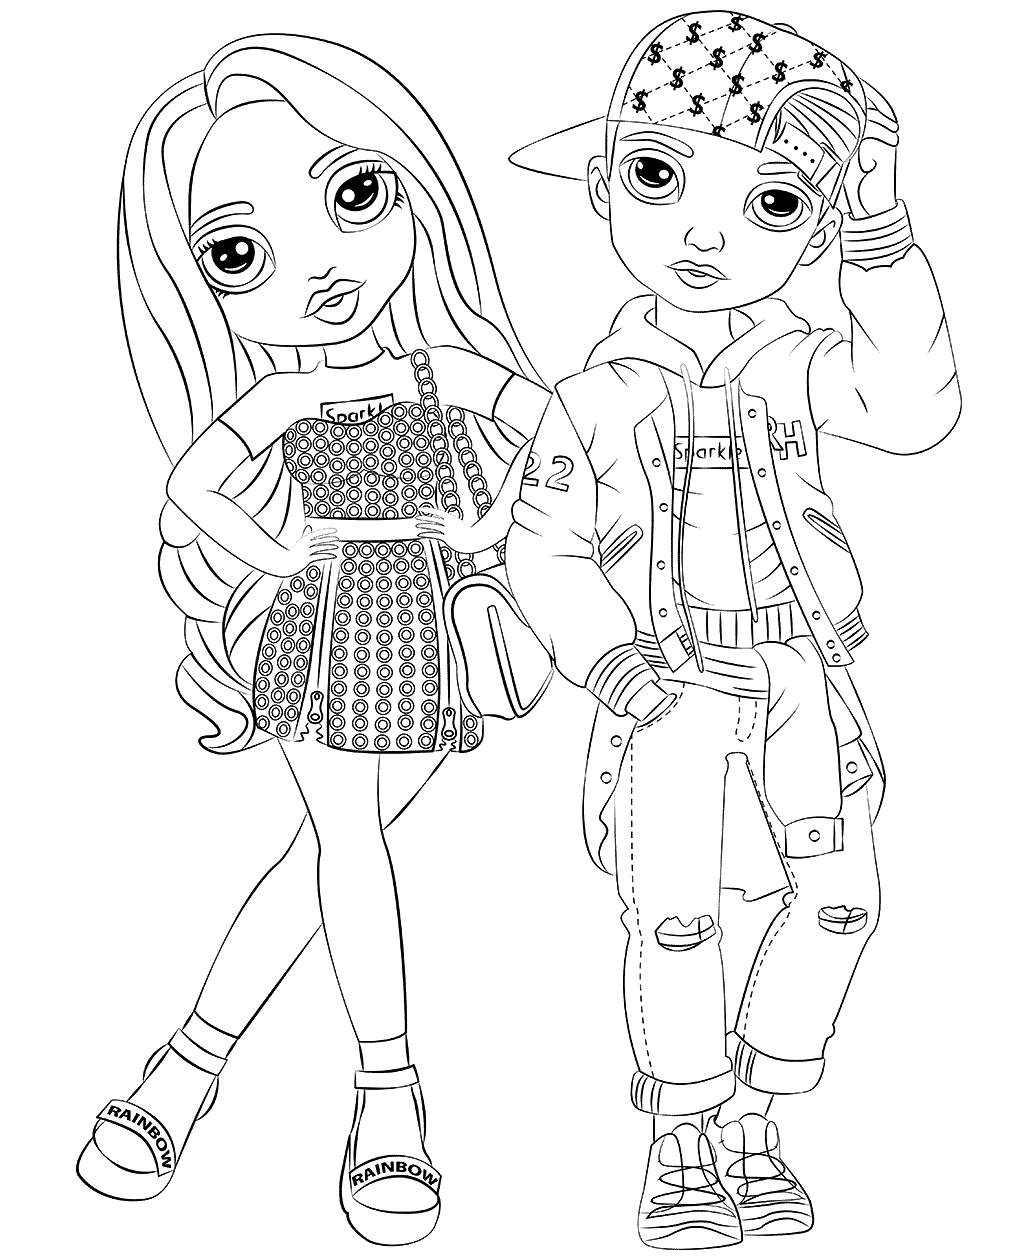 Rainbow High Coloring Pages to Print